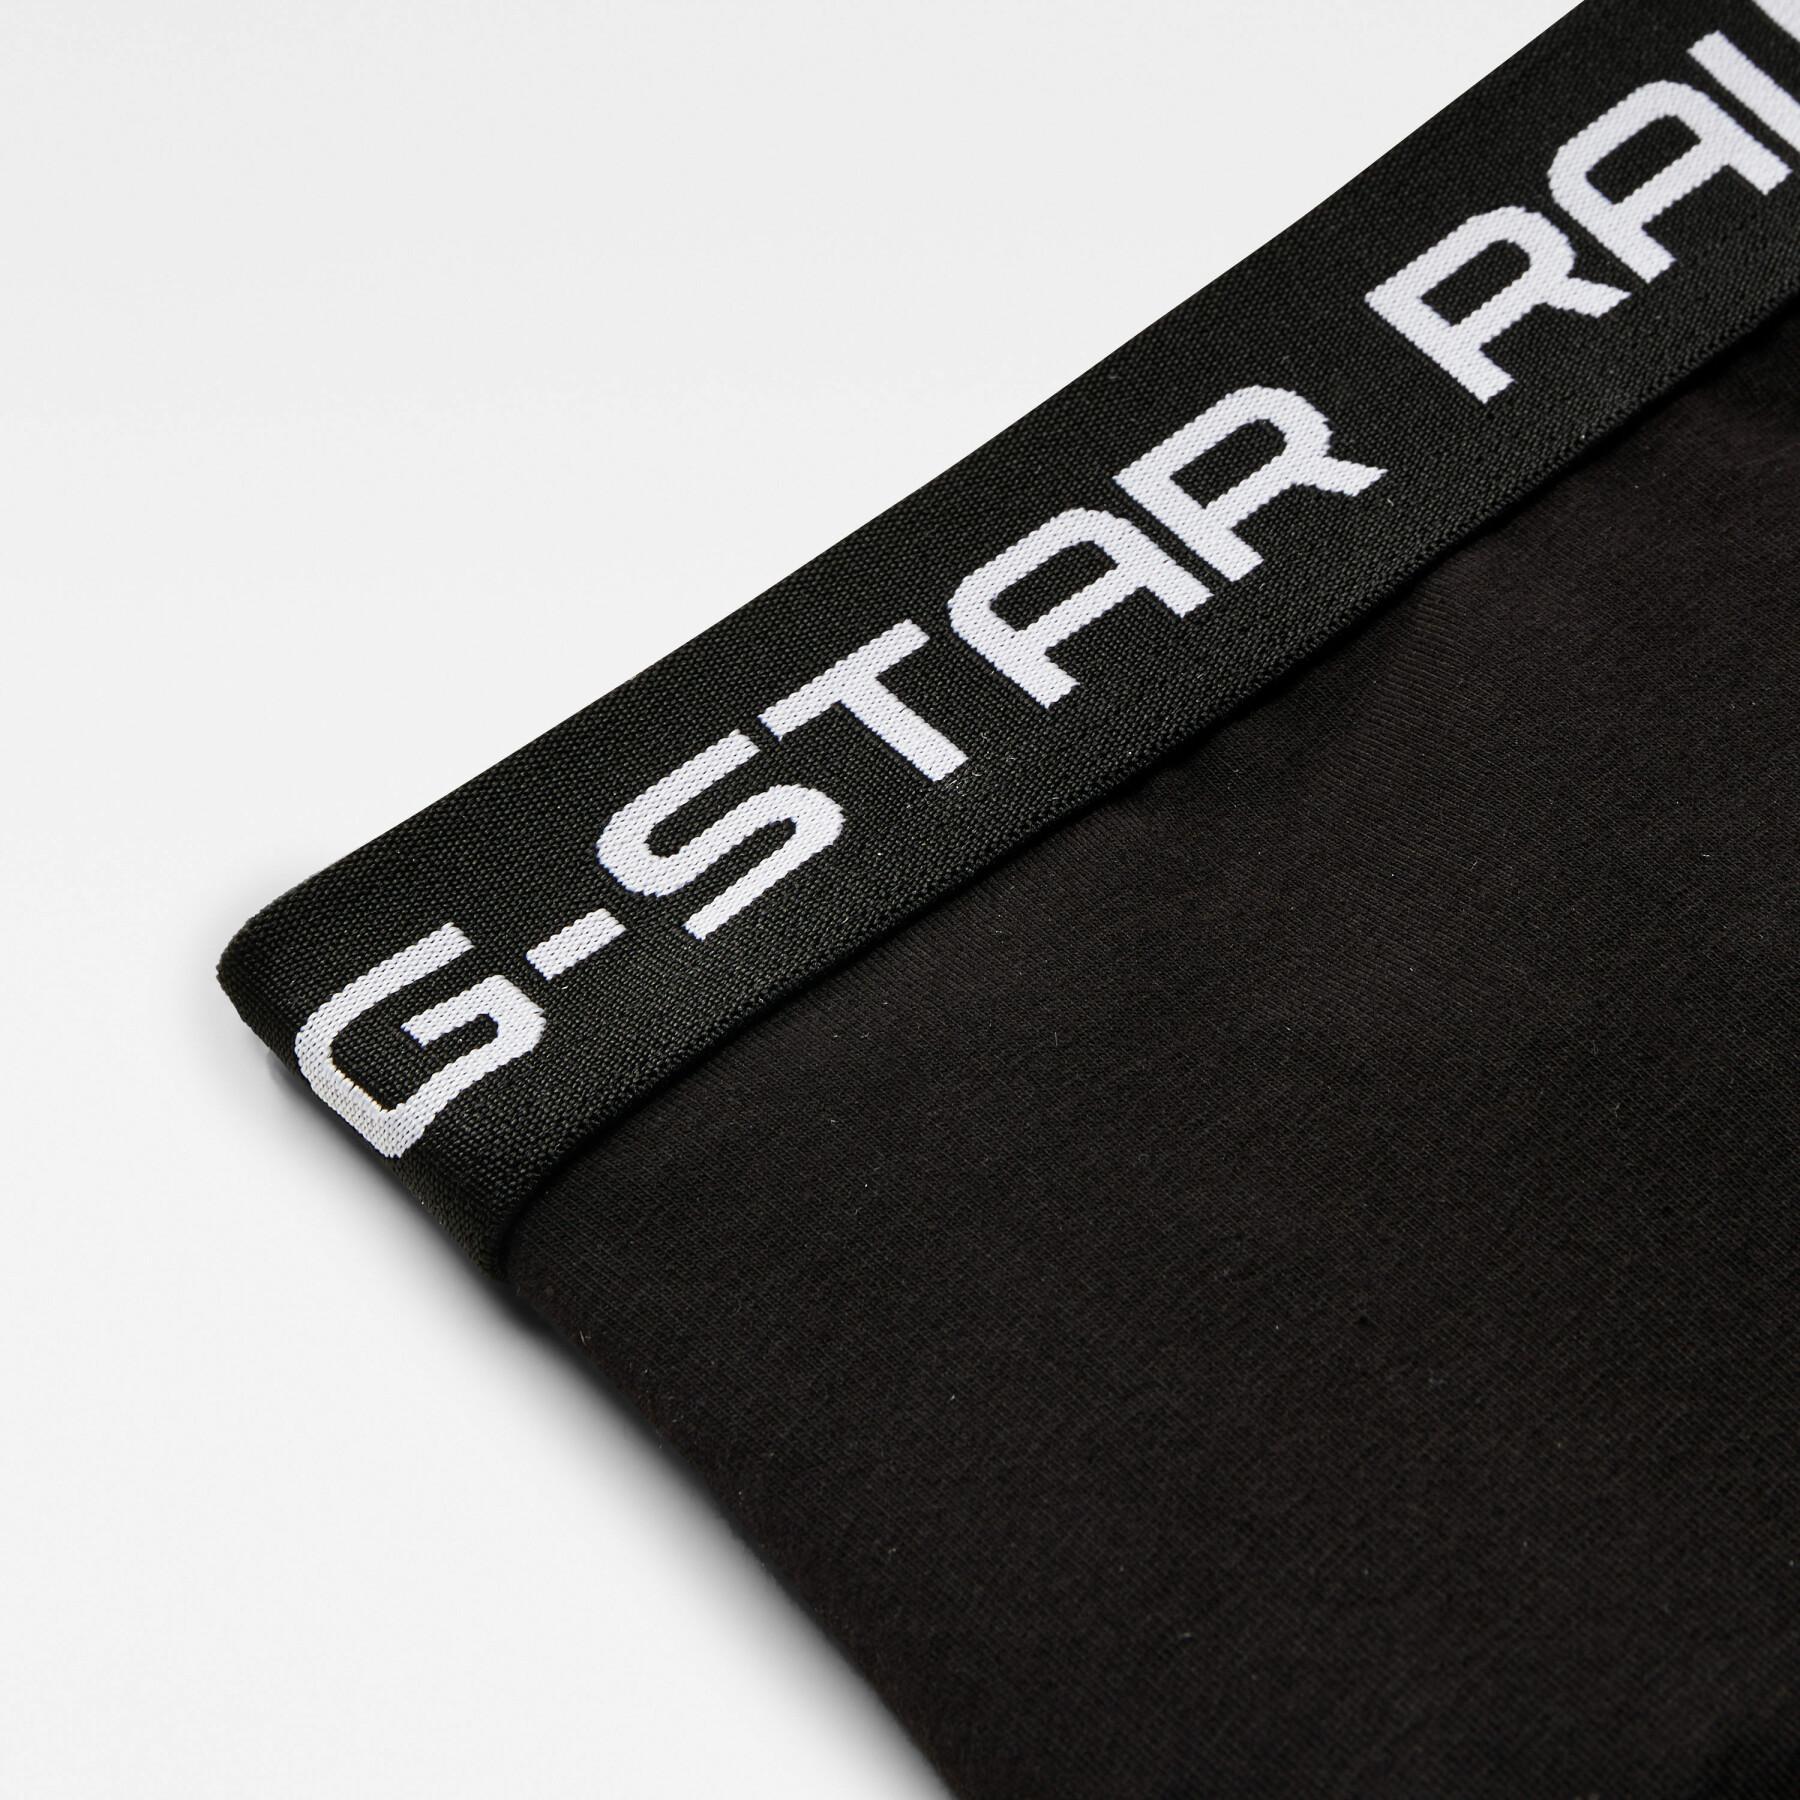 Packung mit 3 Boxershorts G-Star Classic trunk